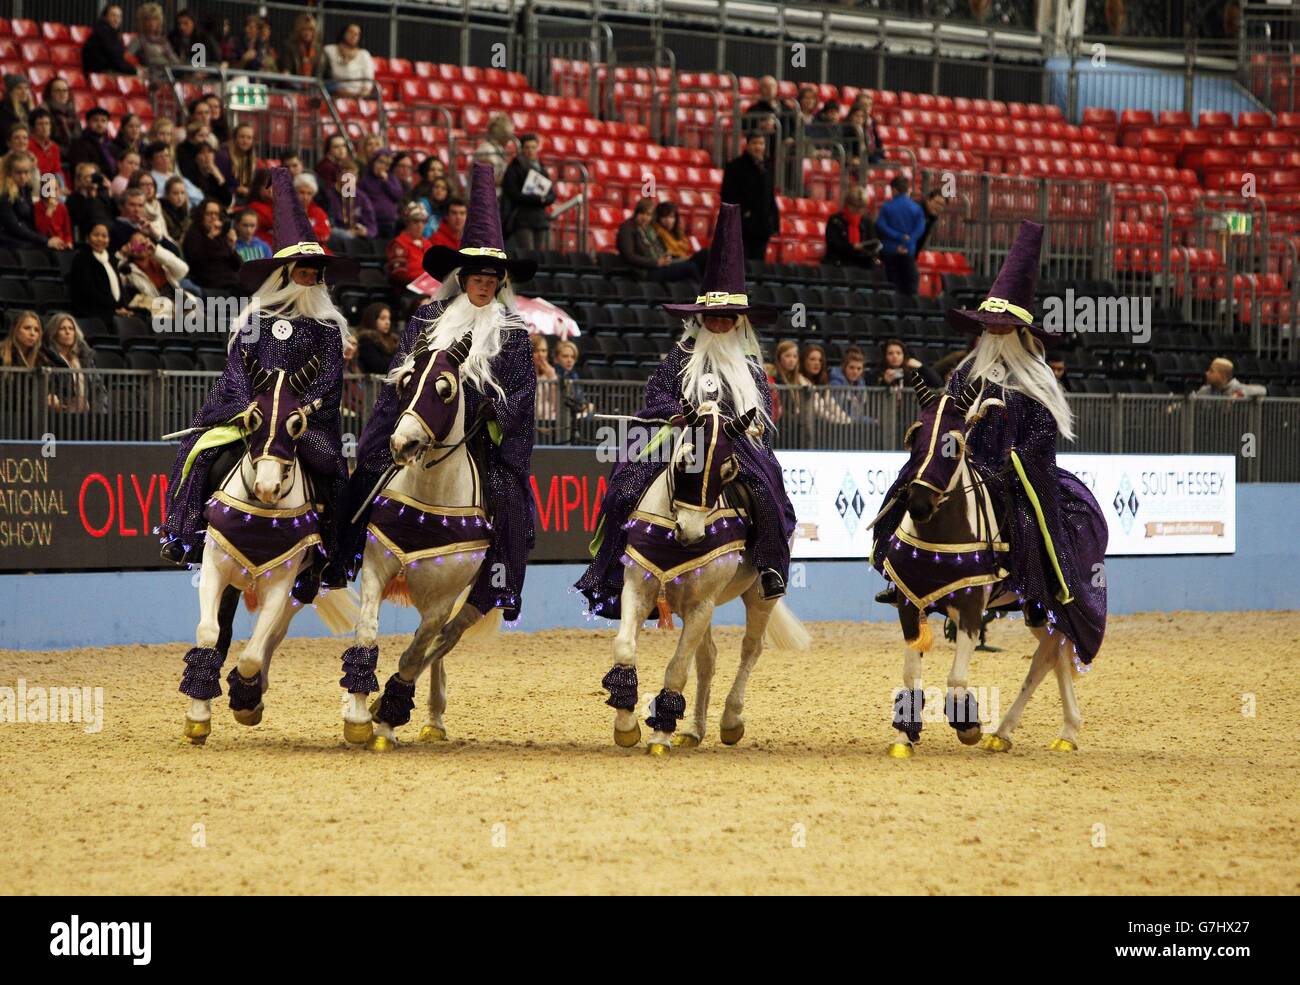 Members of the Witheridge Riding Club dress as wizards as they compete in the SEIB/British Riding Clubs Quadrille of the Year during day six of the Olympia London International Horse Show at the Olympia Exhibition Centre, London. Stock Photo